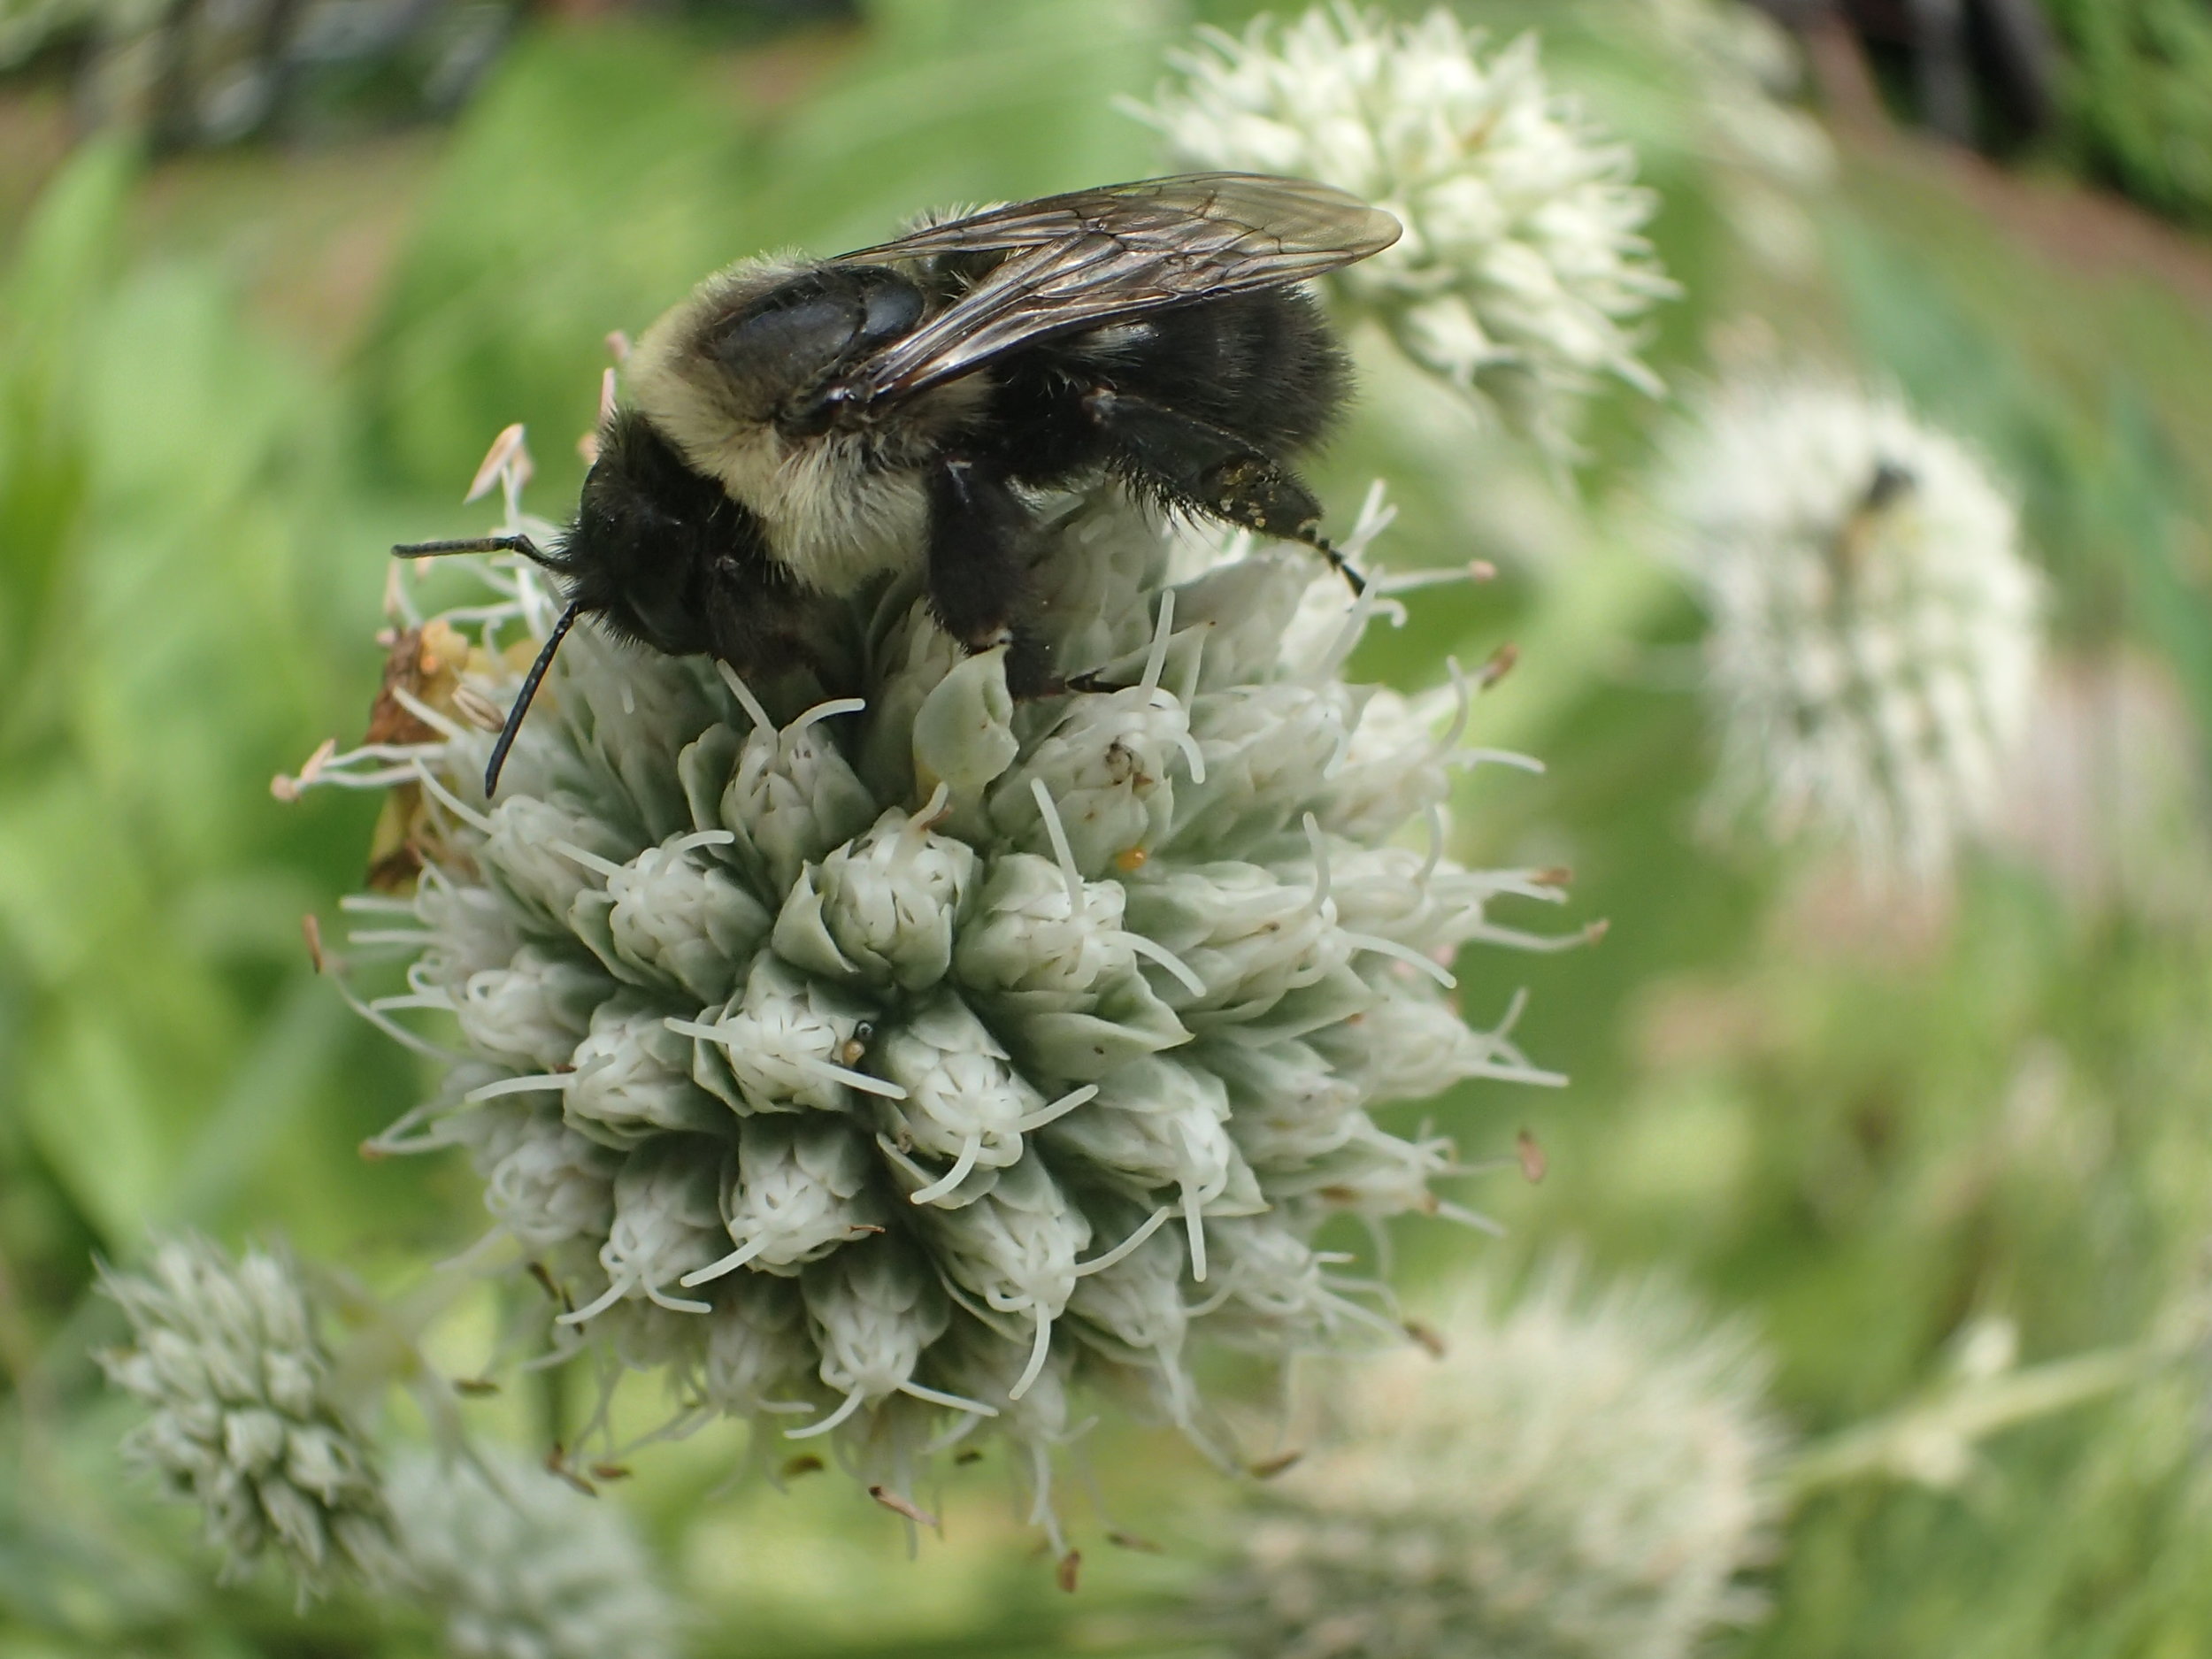 Rattlesnake Master with friend